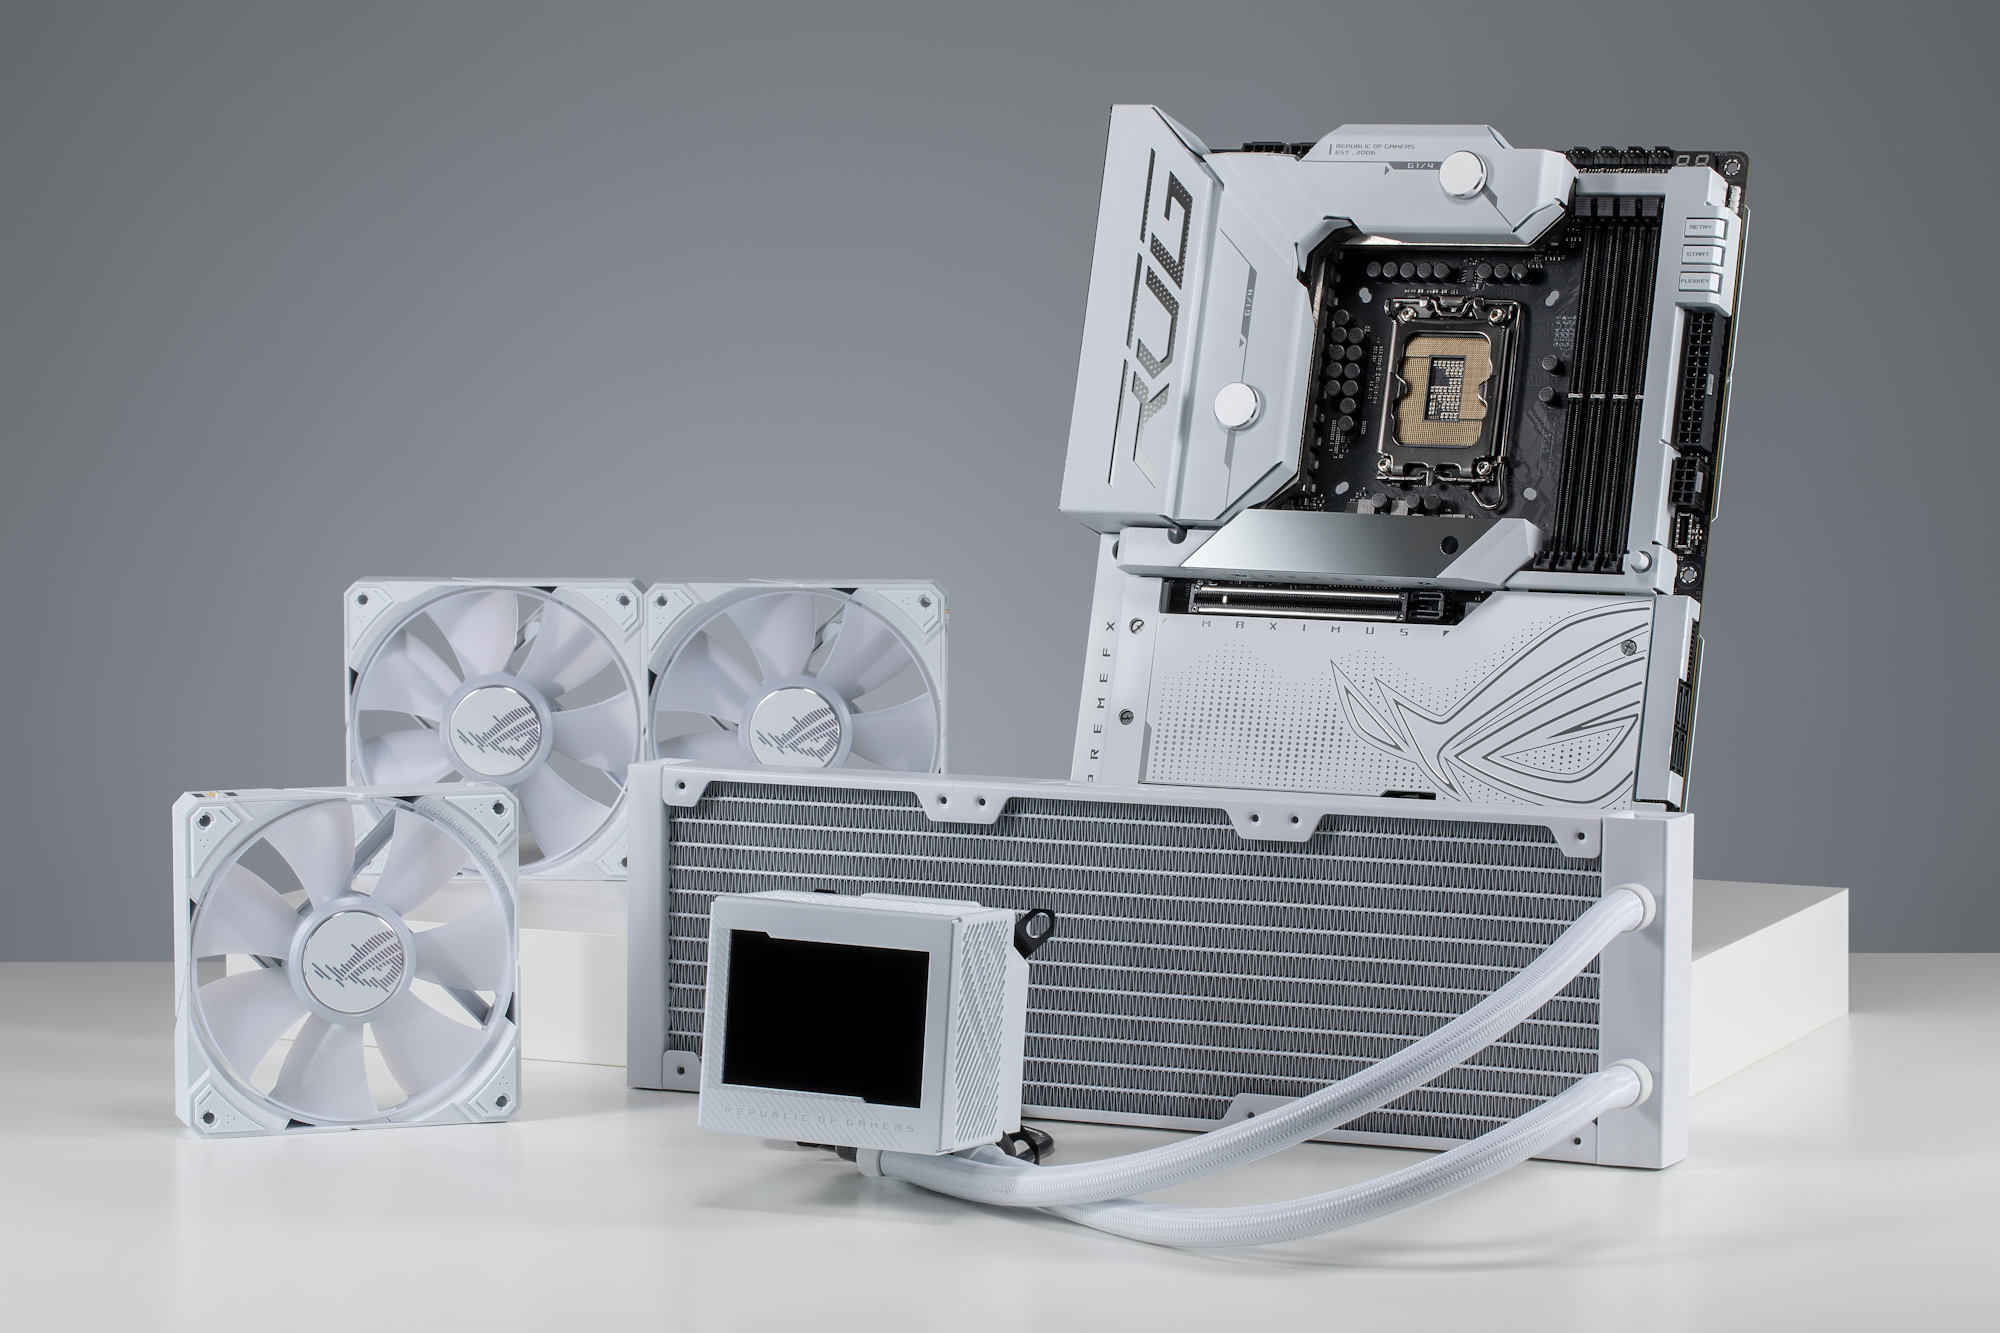 The ROG Maximus Z790 Formula motherboard and ROG Ryujin III AIO White Edition AIO liquid cooler arranged on a table